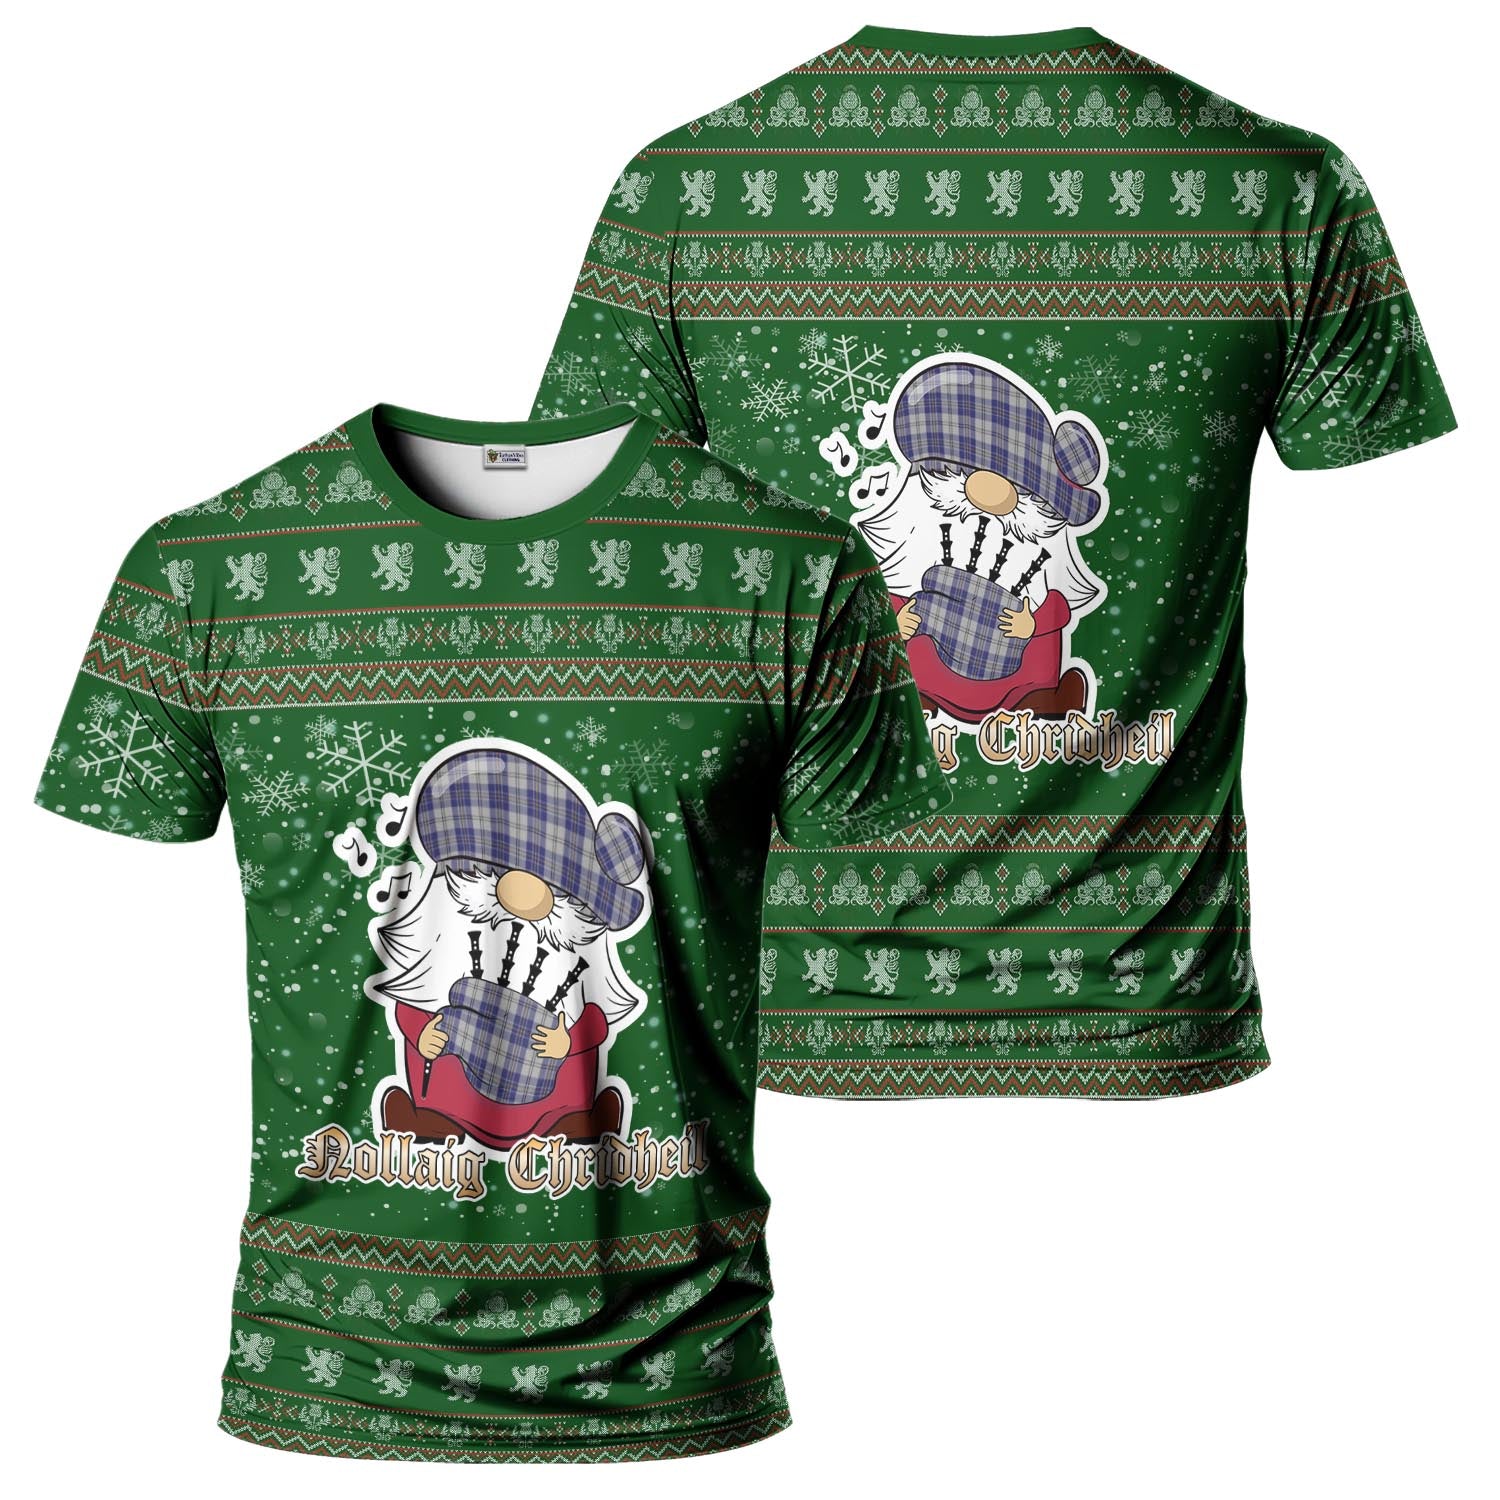 MacPherson Dress Blue Clan Christmas Family T-Shirt with Funny Gnome Playing Bagpipes Men's Shirt Green - Tartanvibesclothing